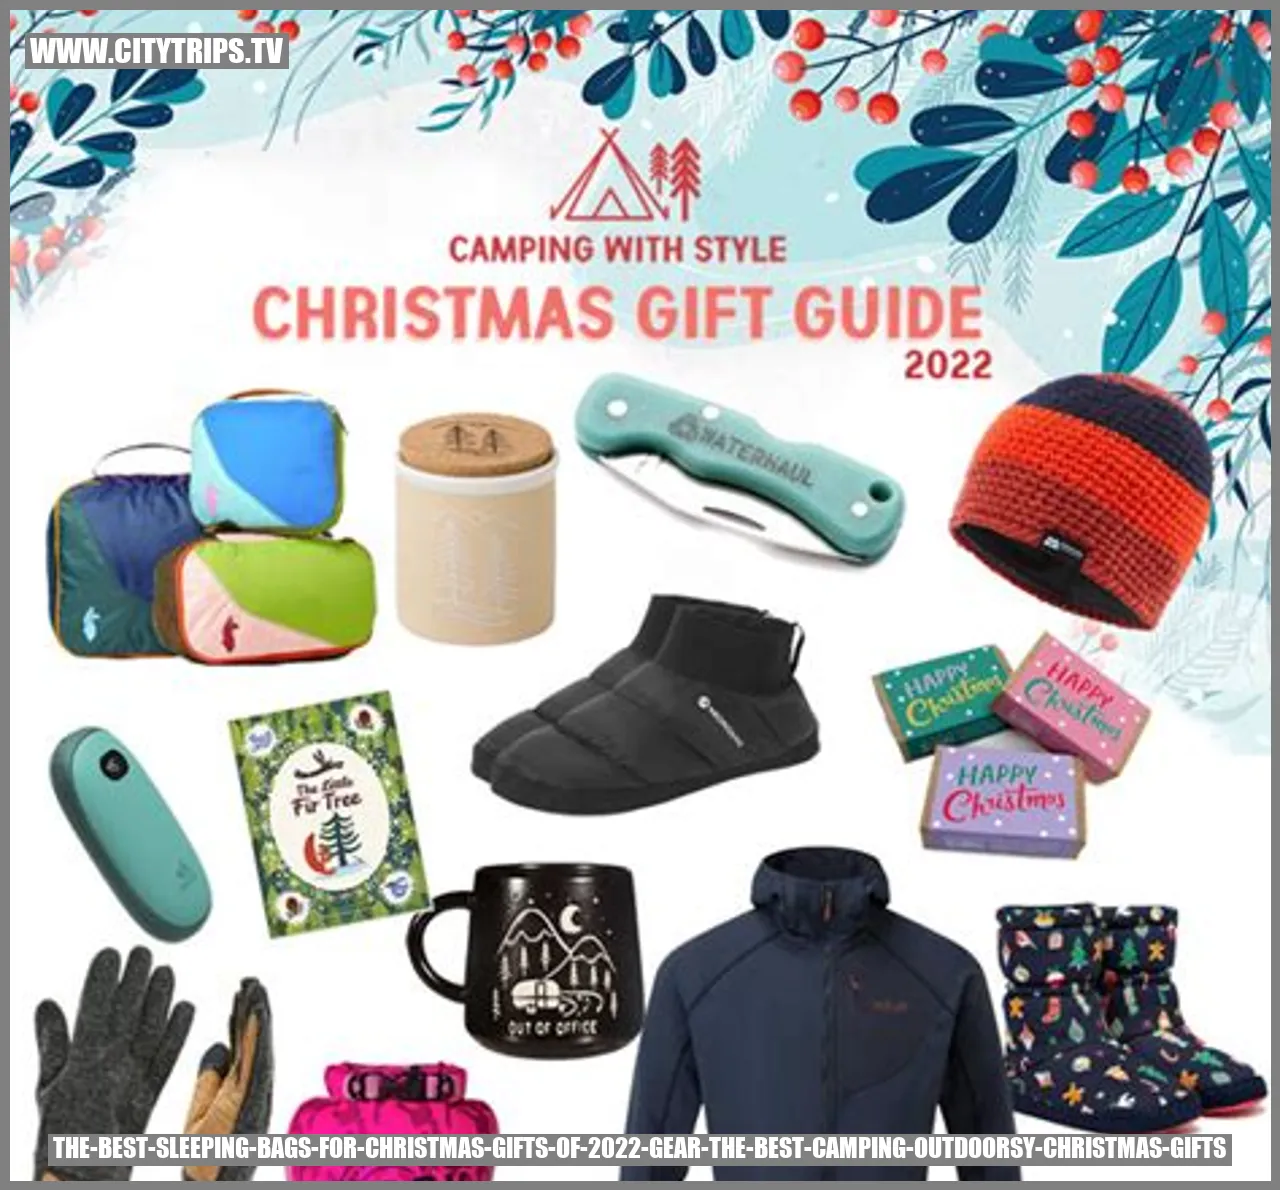 Best Sleeping Bags for Christmas Gifts of 2022